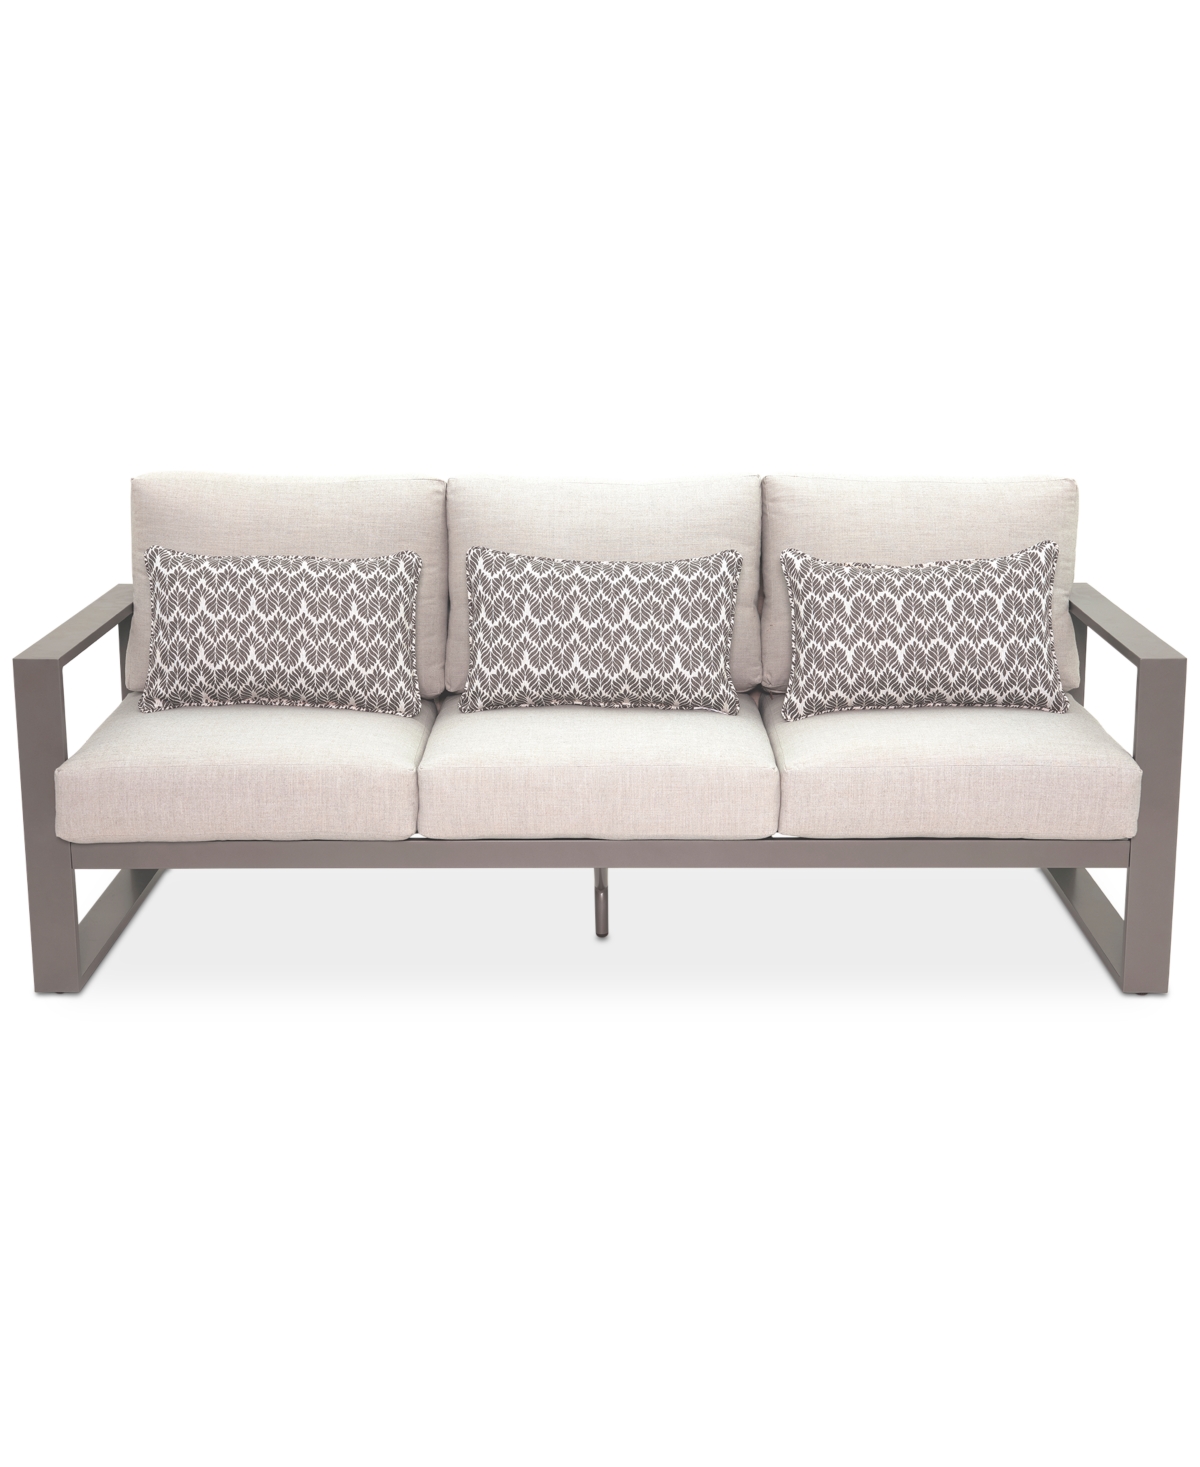 Agio St Kitts Outdoor Sofa In Lifeguard Oyster